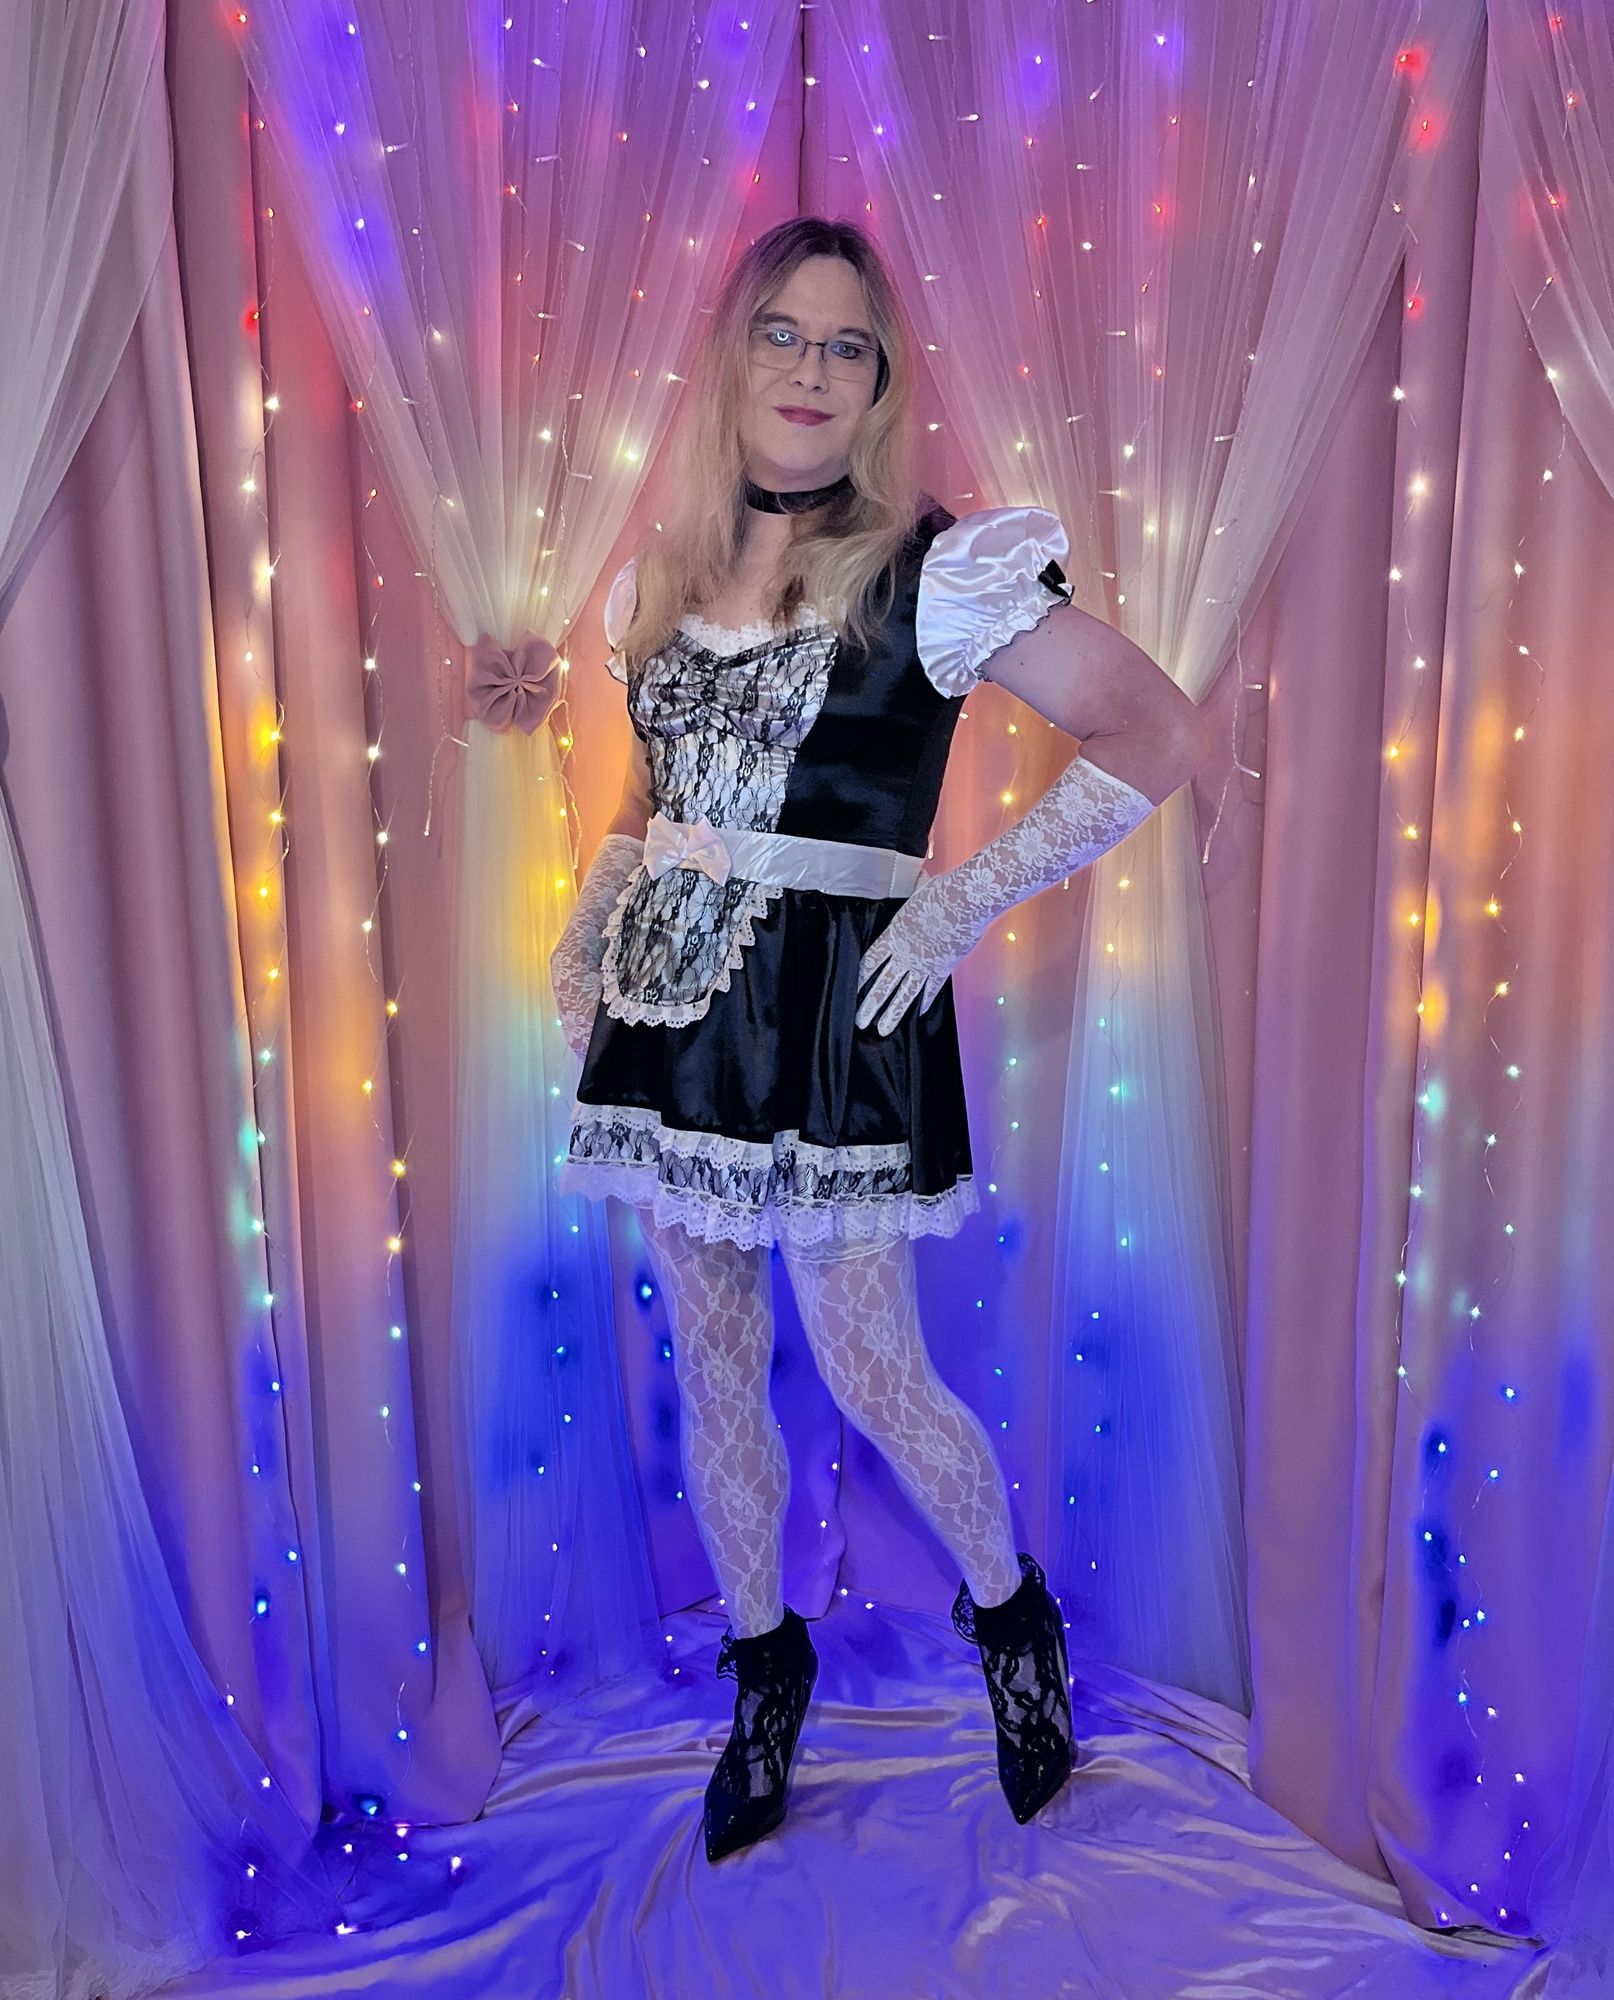 Joanie - Maid In Lace #15